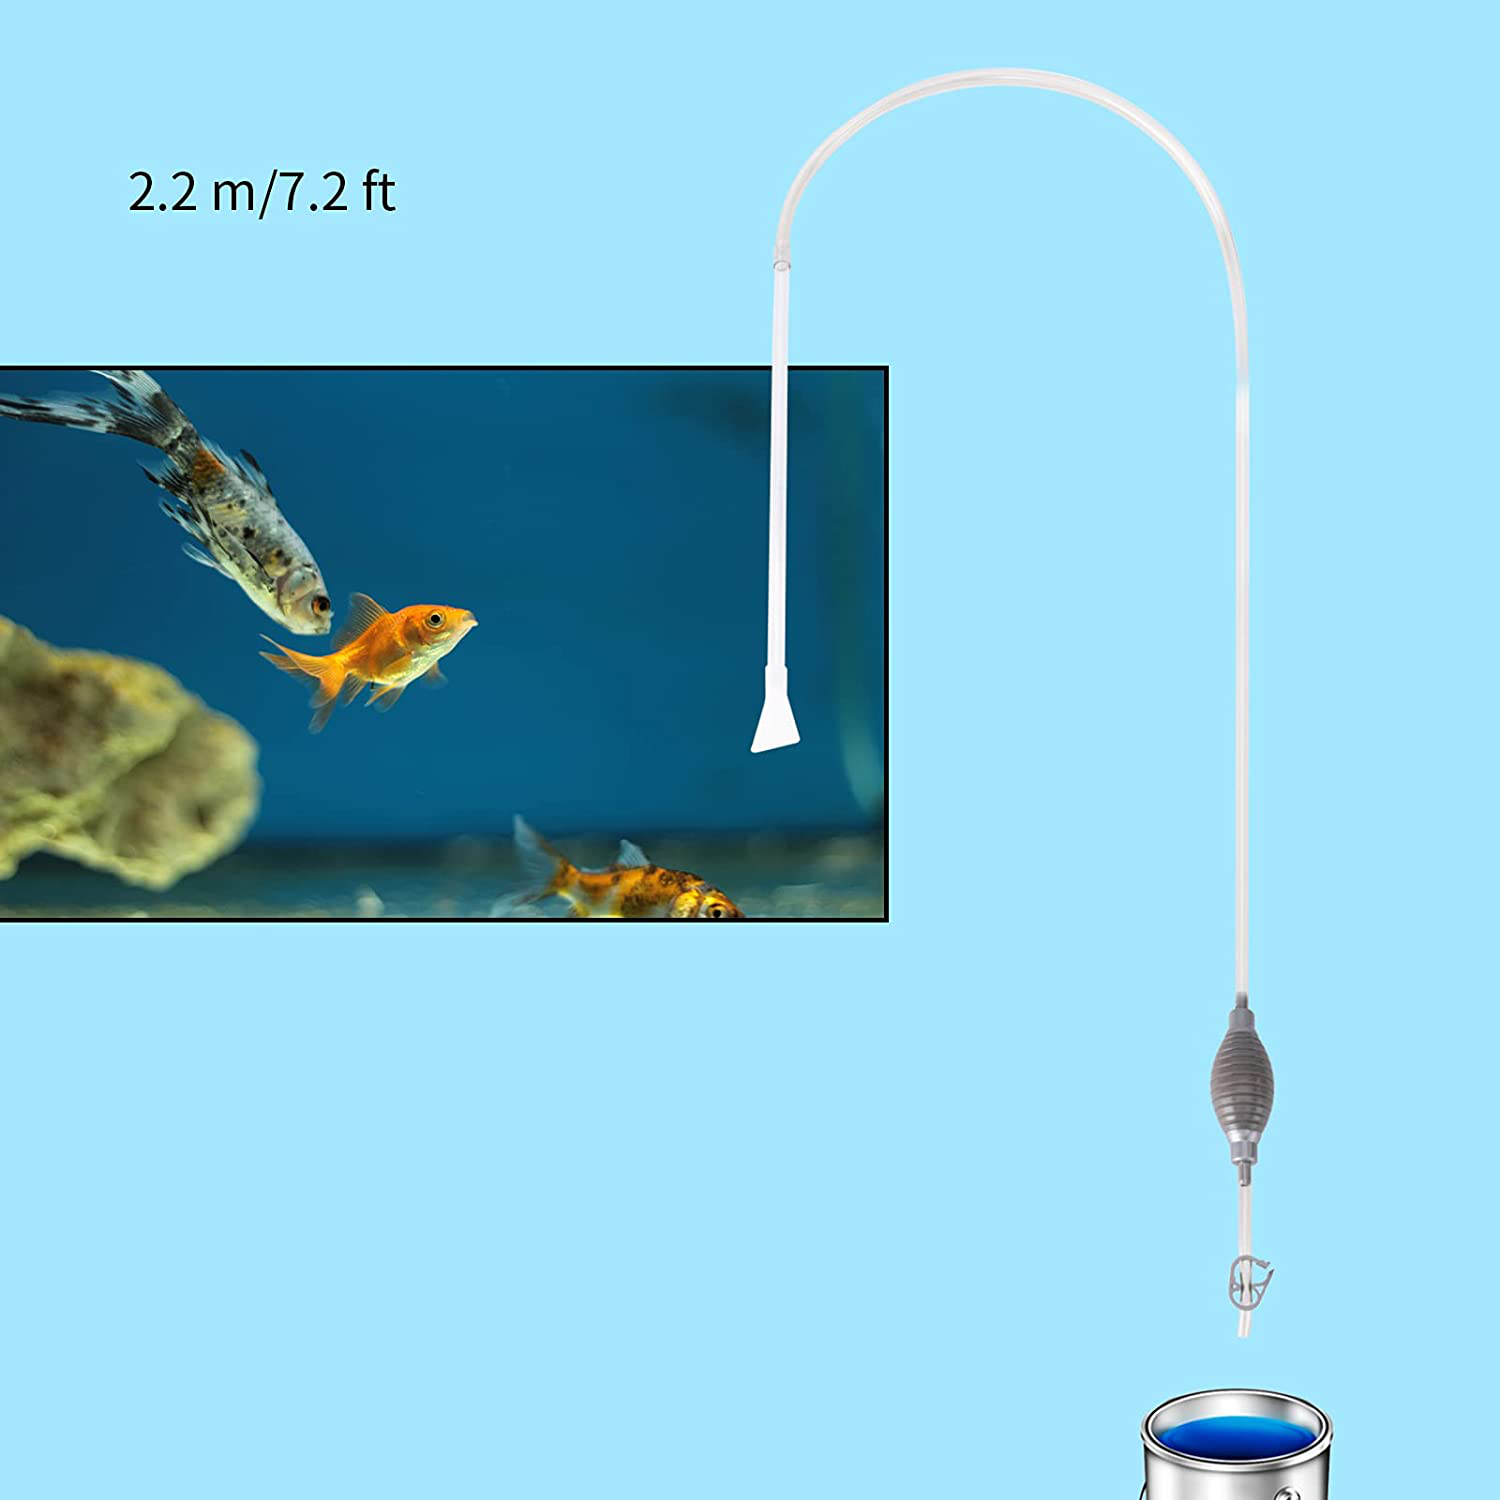 Libara Aquarium Water Changer, Long Nozzle Fish Tank Cleaner Kit, the All-In-One Pond Siphon for Gravel & Sand Cleaning, Manual Suction Pipe for Sucking and Feces